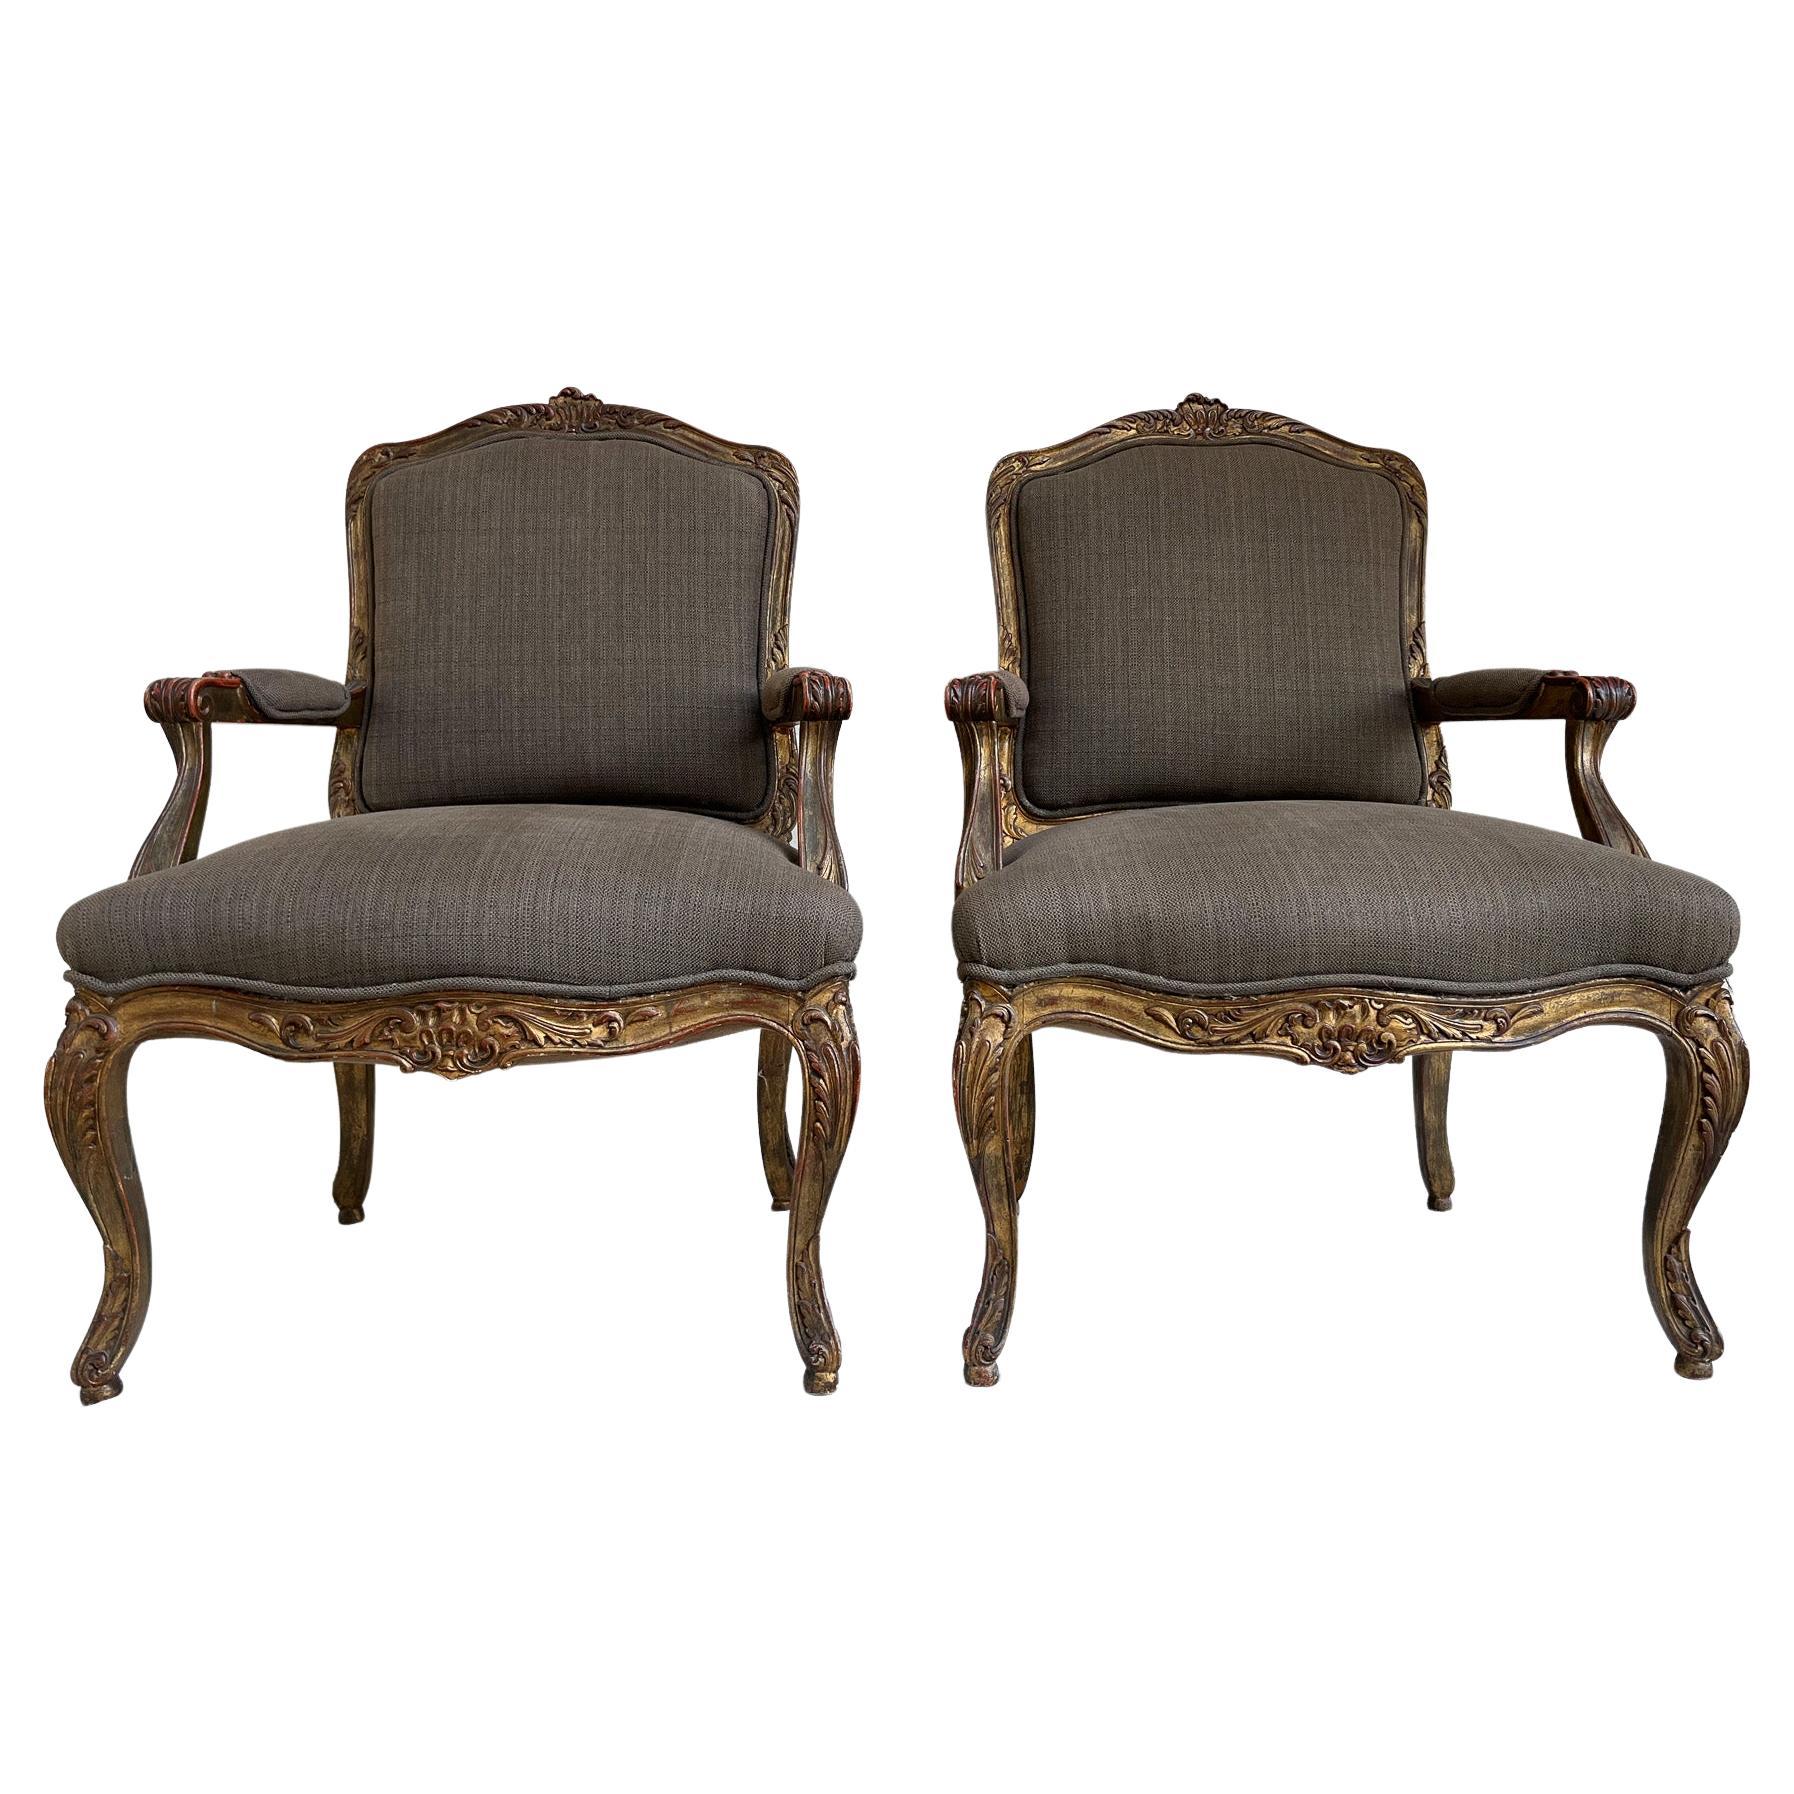 Pair of Louis XV Style Fauteuils in Gilded and Patinated Wood